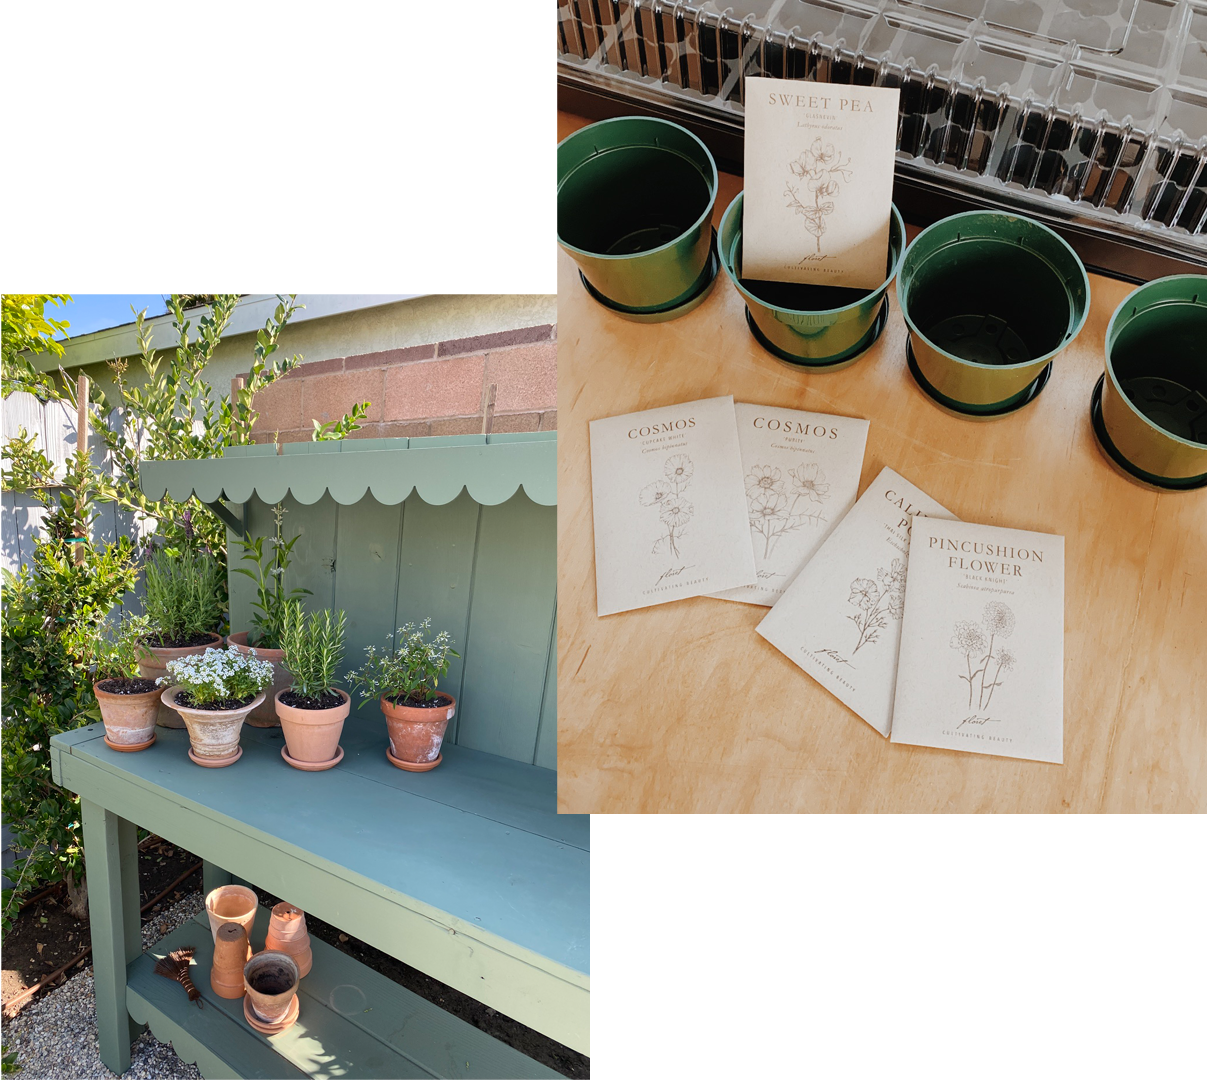 2 images; 1 of terracotta pots on a garden bench; 1 of Cosmos seed packets and green garden cups.